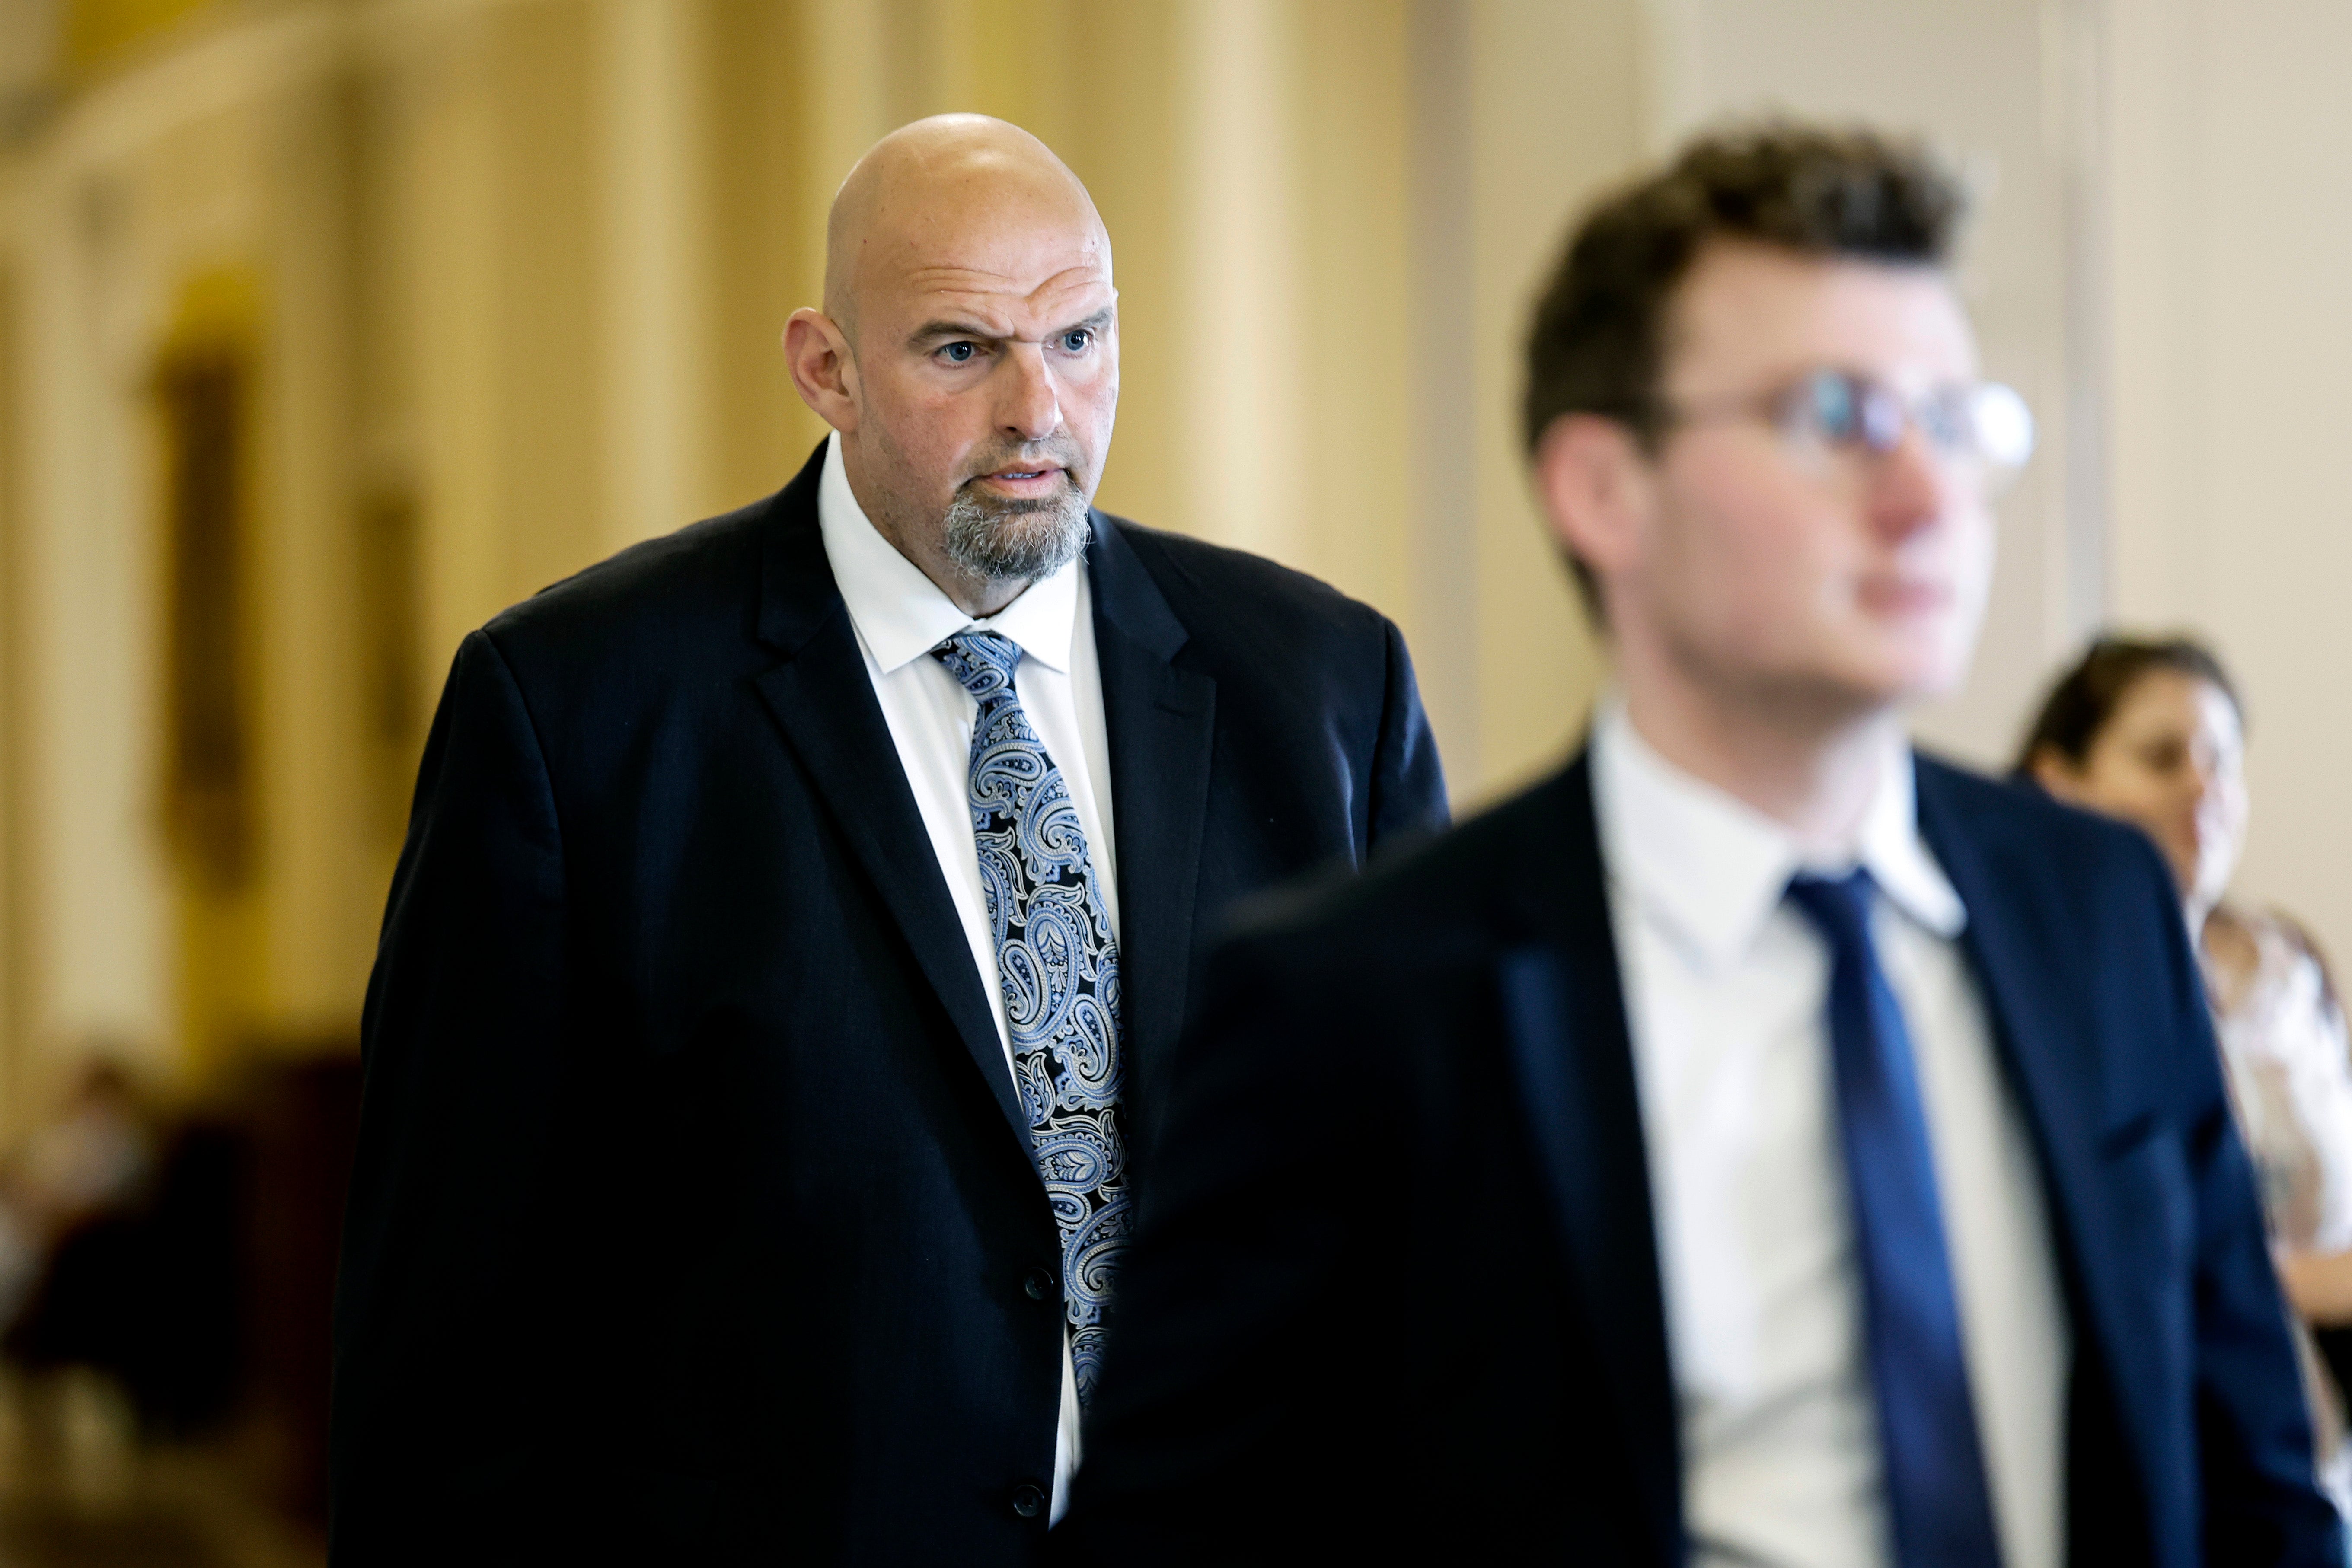 John Fetterman: famously blunt and unconcerned with the illusion of playing nice